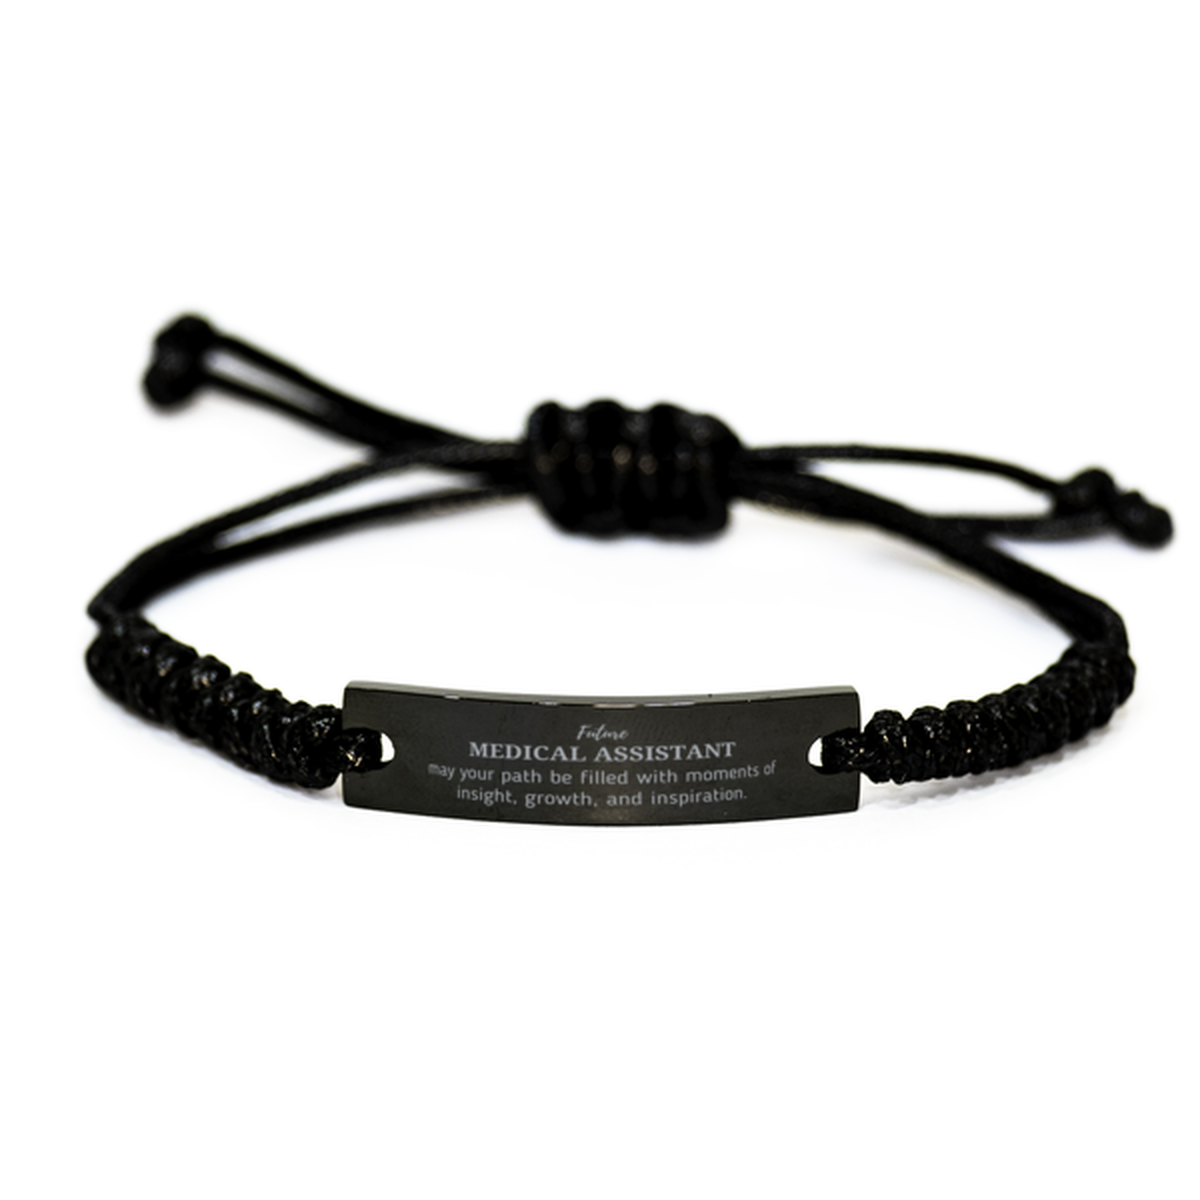 Future Medical Assistant Gifts, May your path be filled with moments of insight, Graduation Gifts for New Medical Assistant, Christmas Unique Black Rope Bracelet For Men, Women, Friends